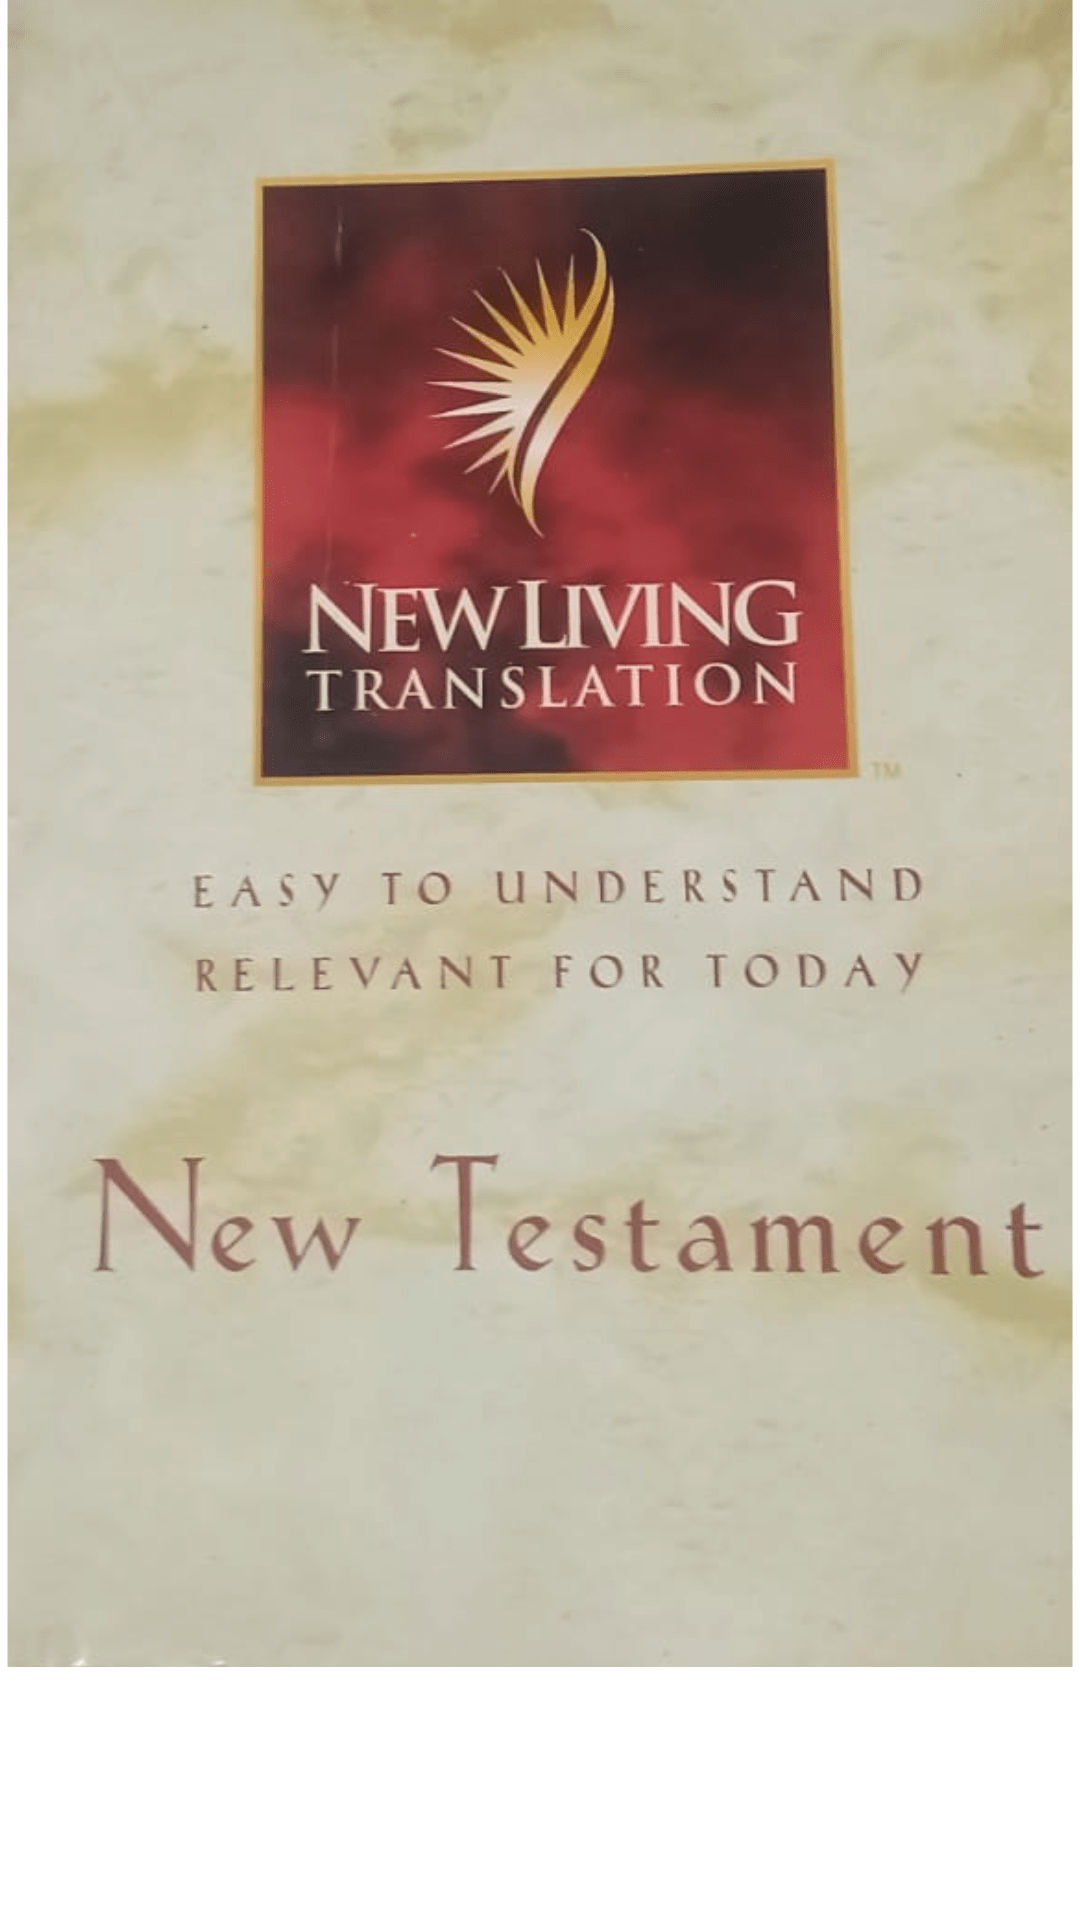 New Living Translation: Easy to Understand Relevant for Today